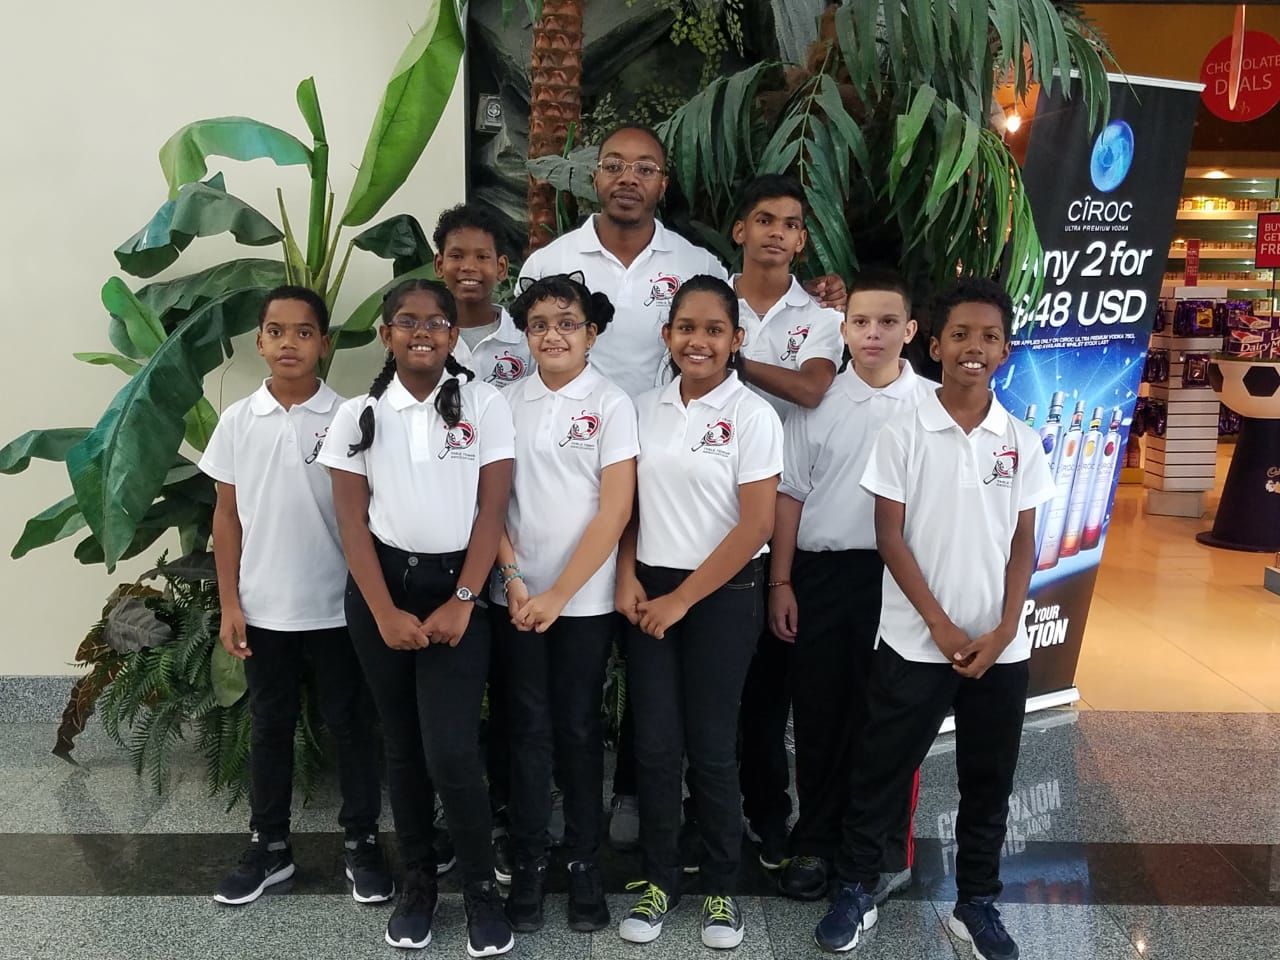 Coach Aaron Edwards, back-row centre, with members of the T&T Under-11 Boys’ and Girls; and Under-13 Boys’ teams prior to departure for the Caribbean Regional Table Tennis Federation Mini and Pre-Cadet Championship which serves today in Santo, Domingo.